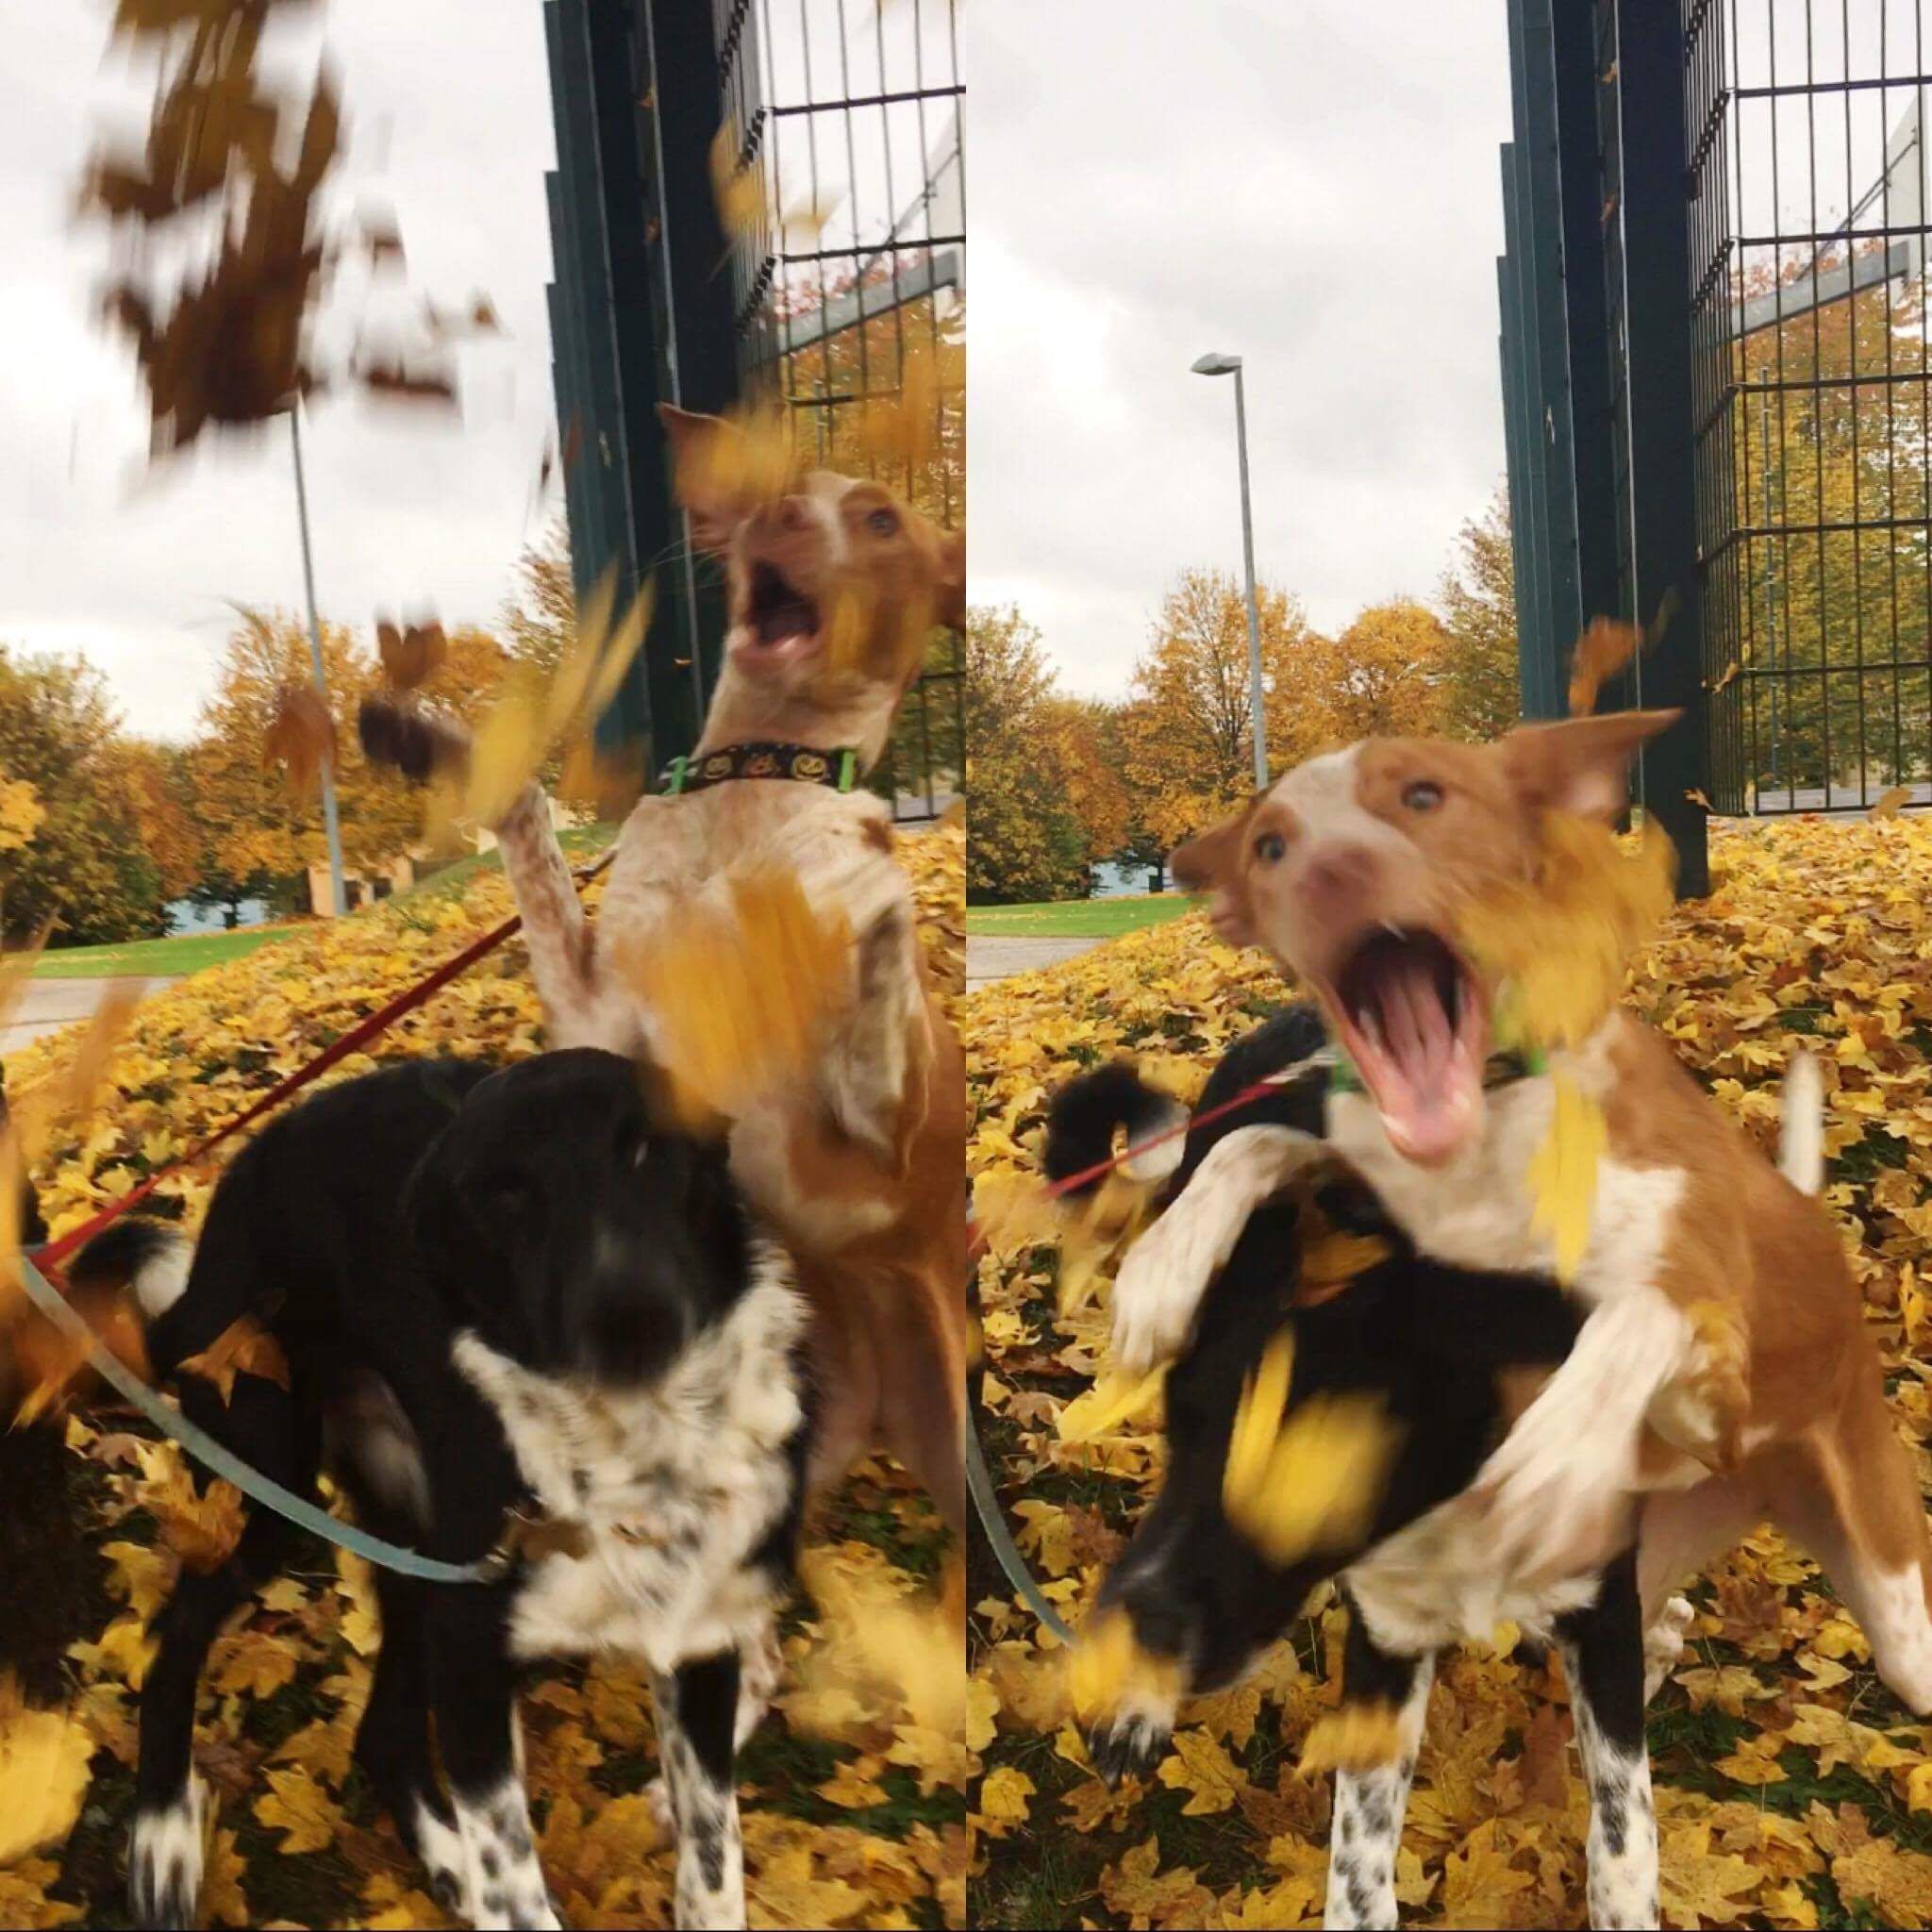 Today my wife tried to take cute fall photos of our puppies.